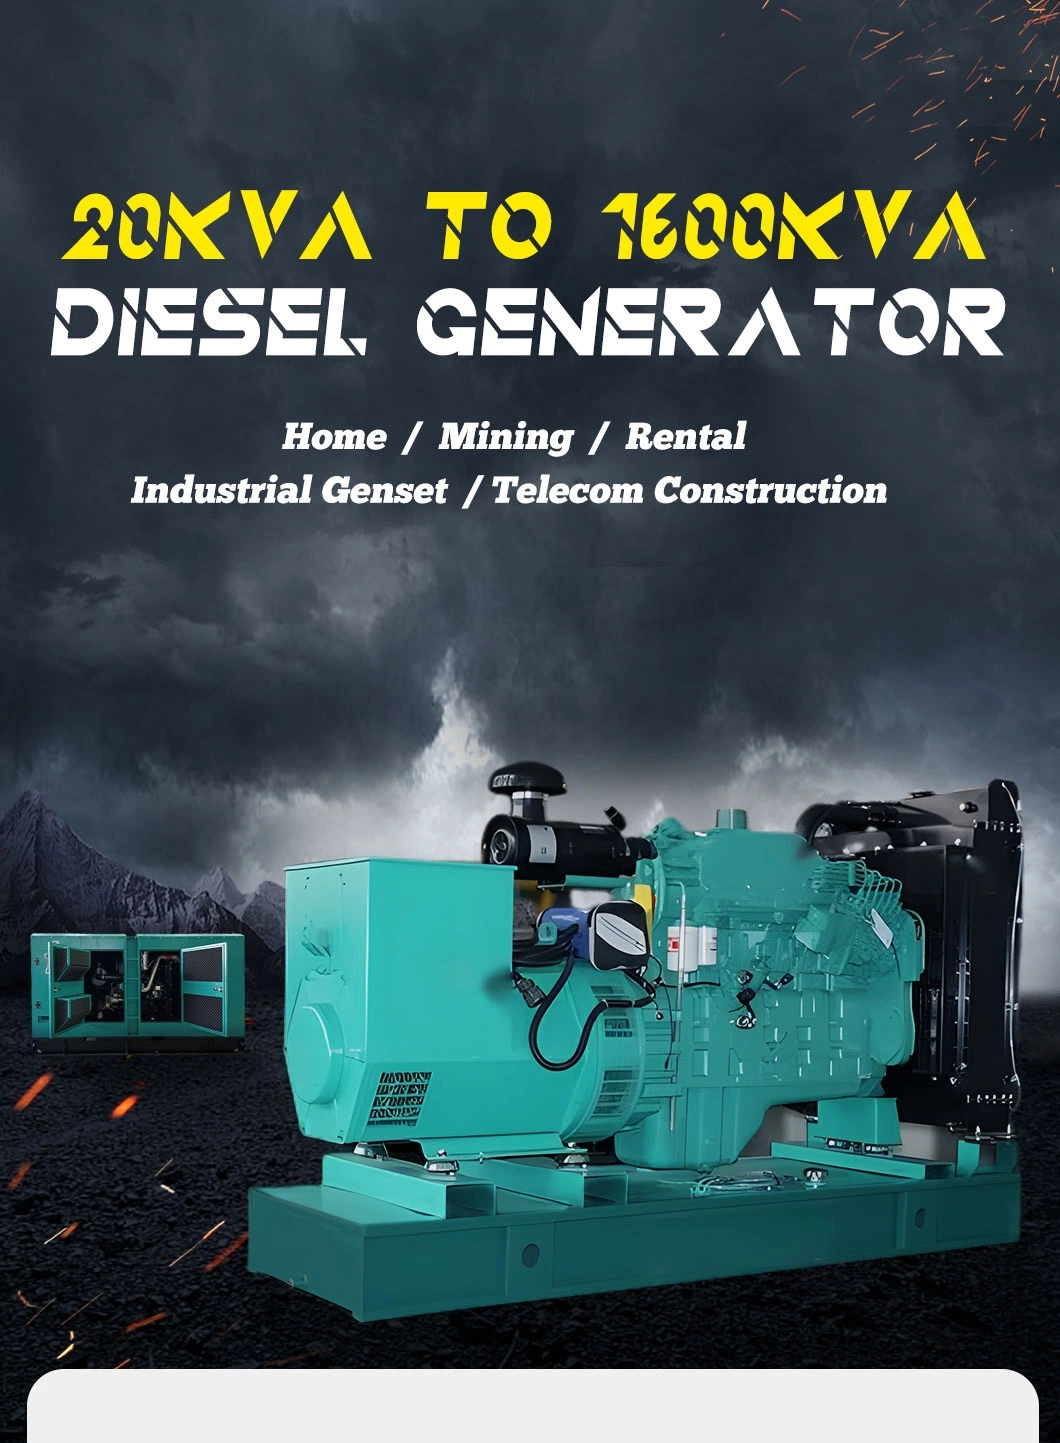 Silent or Open-Type Diesel Generator Sets Are Suitable for Industrial, Domestic, Rental, and Hospital Power Generation, Equipped with Shanghai Diesel Engine